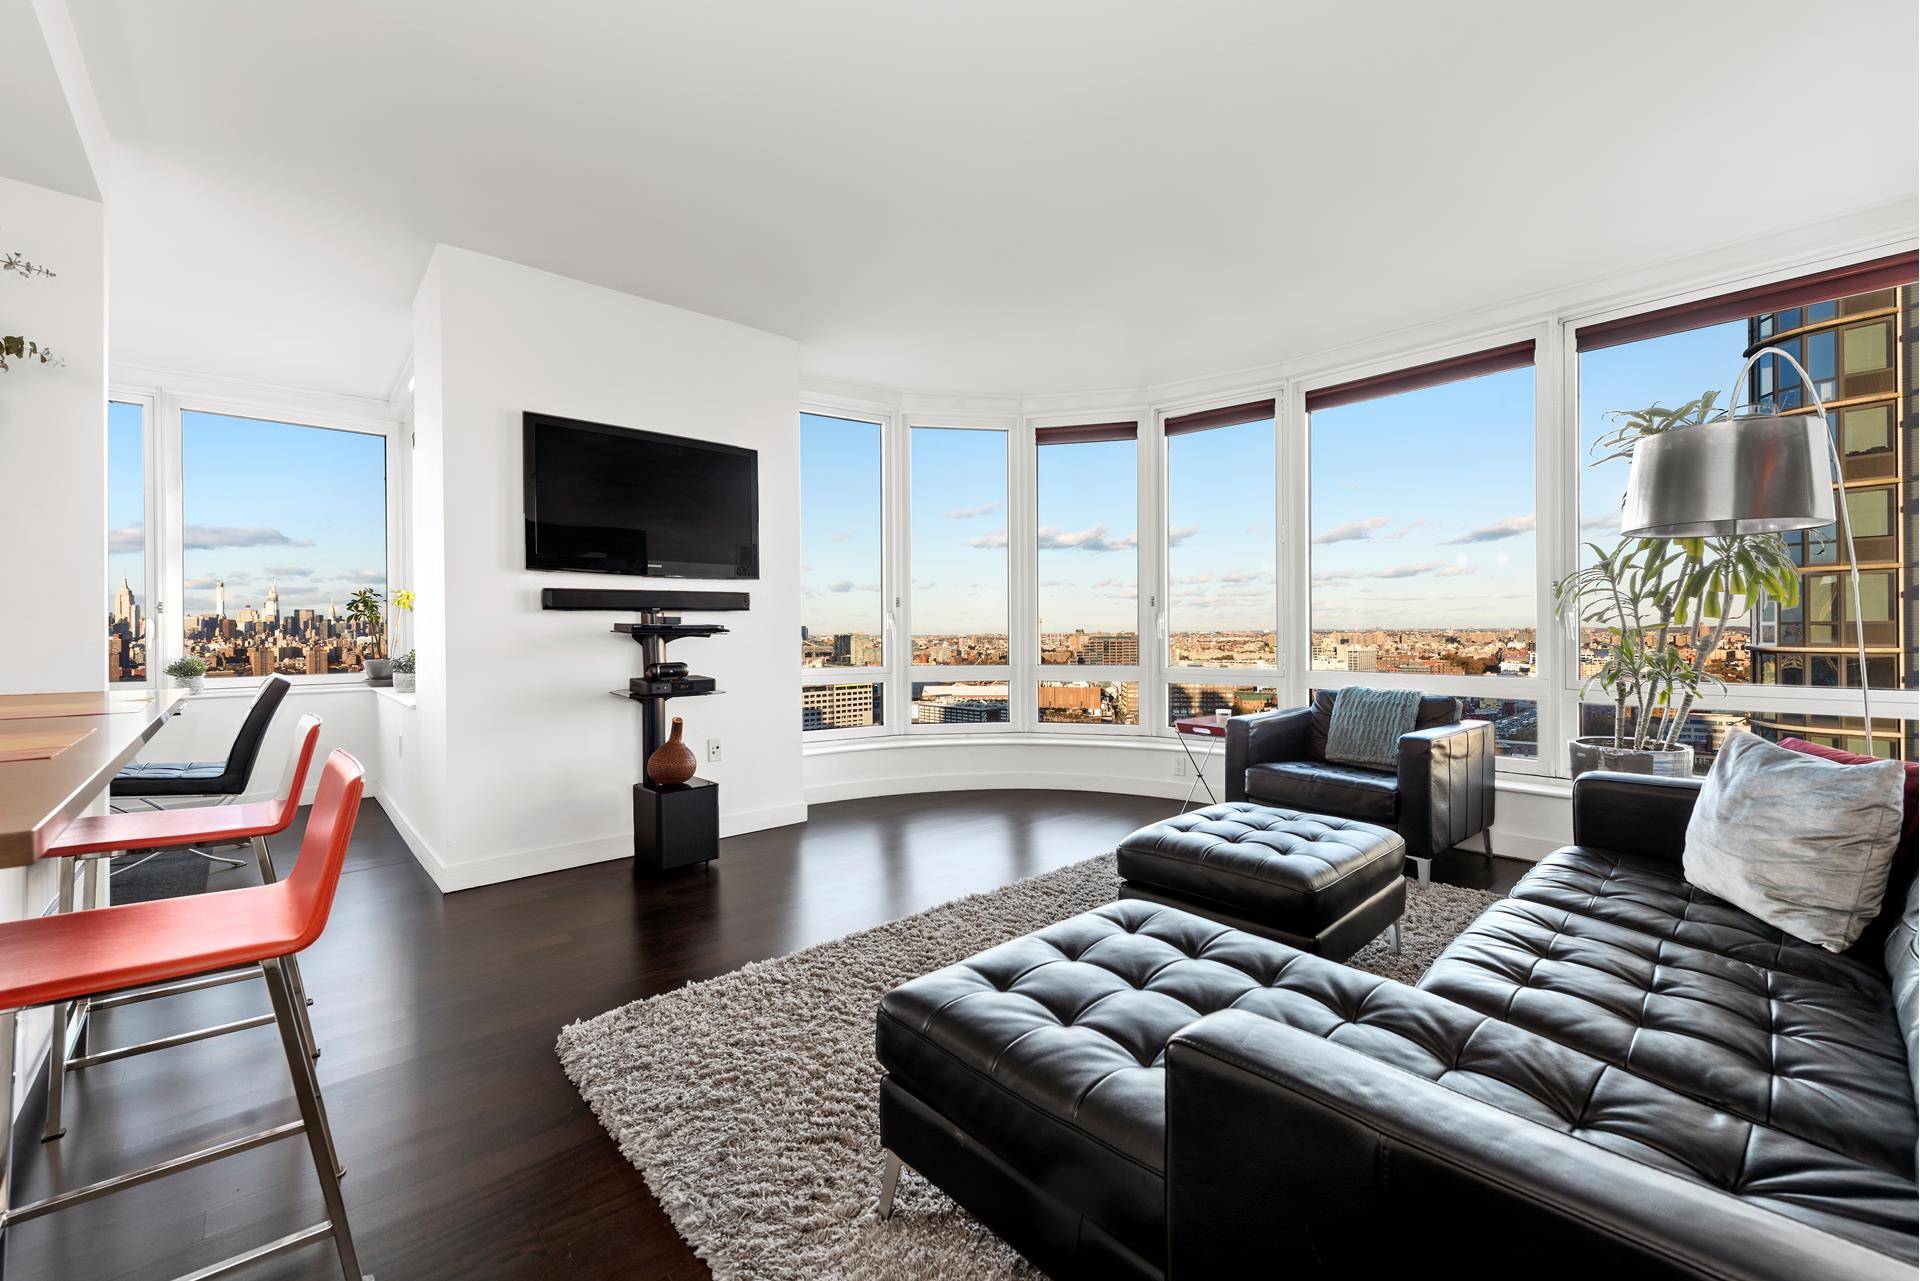 Views view views ! ! The coveted and rarely available A line boasts separate living and dining space with beautiful floor to ceiling windows, a dramatic curved glass wall.